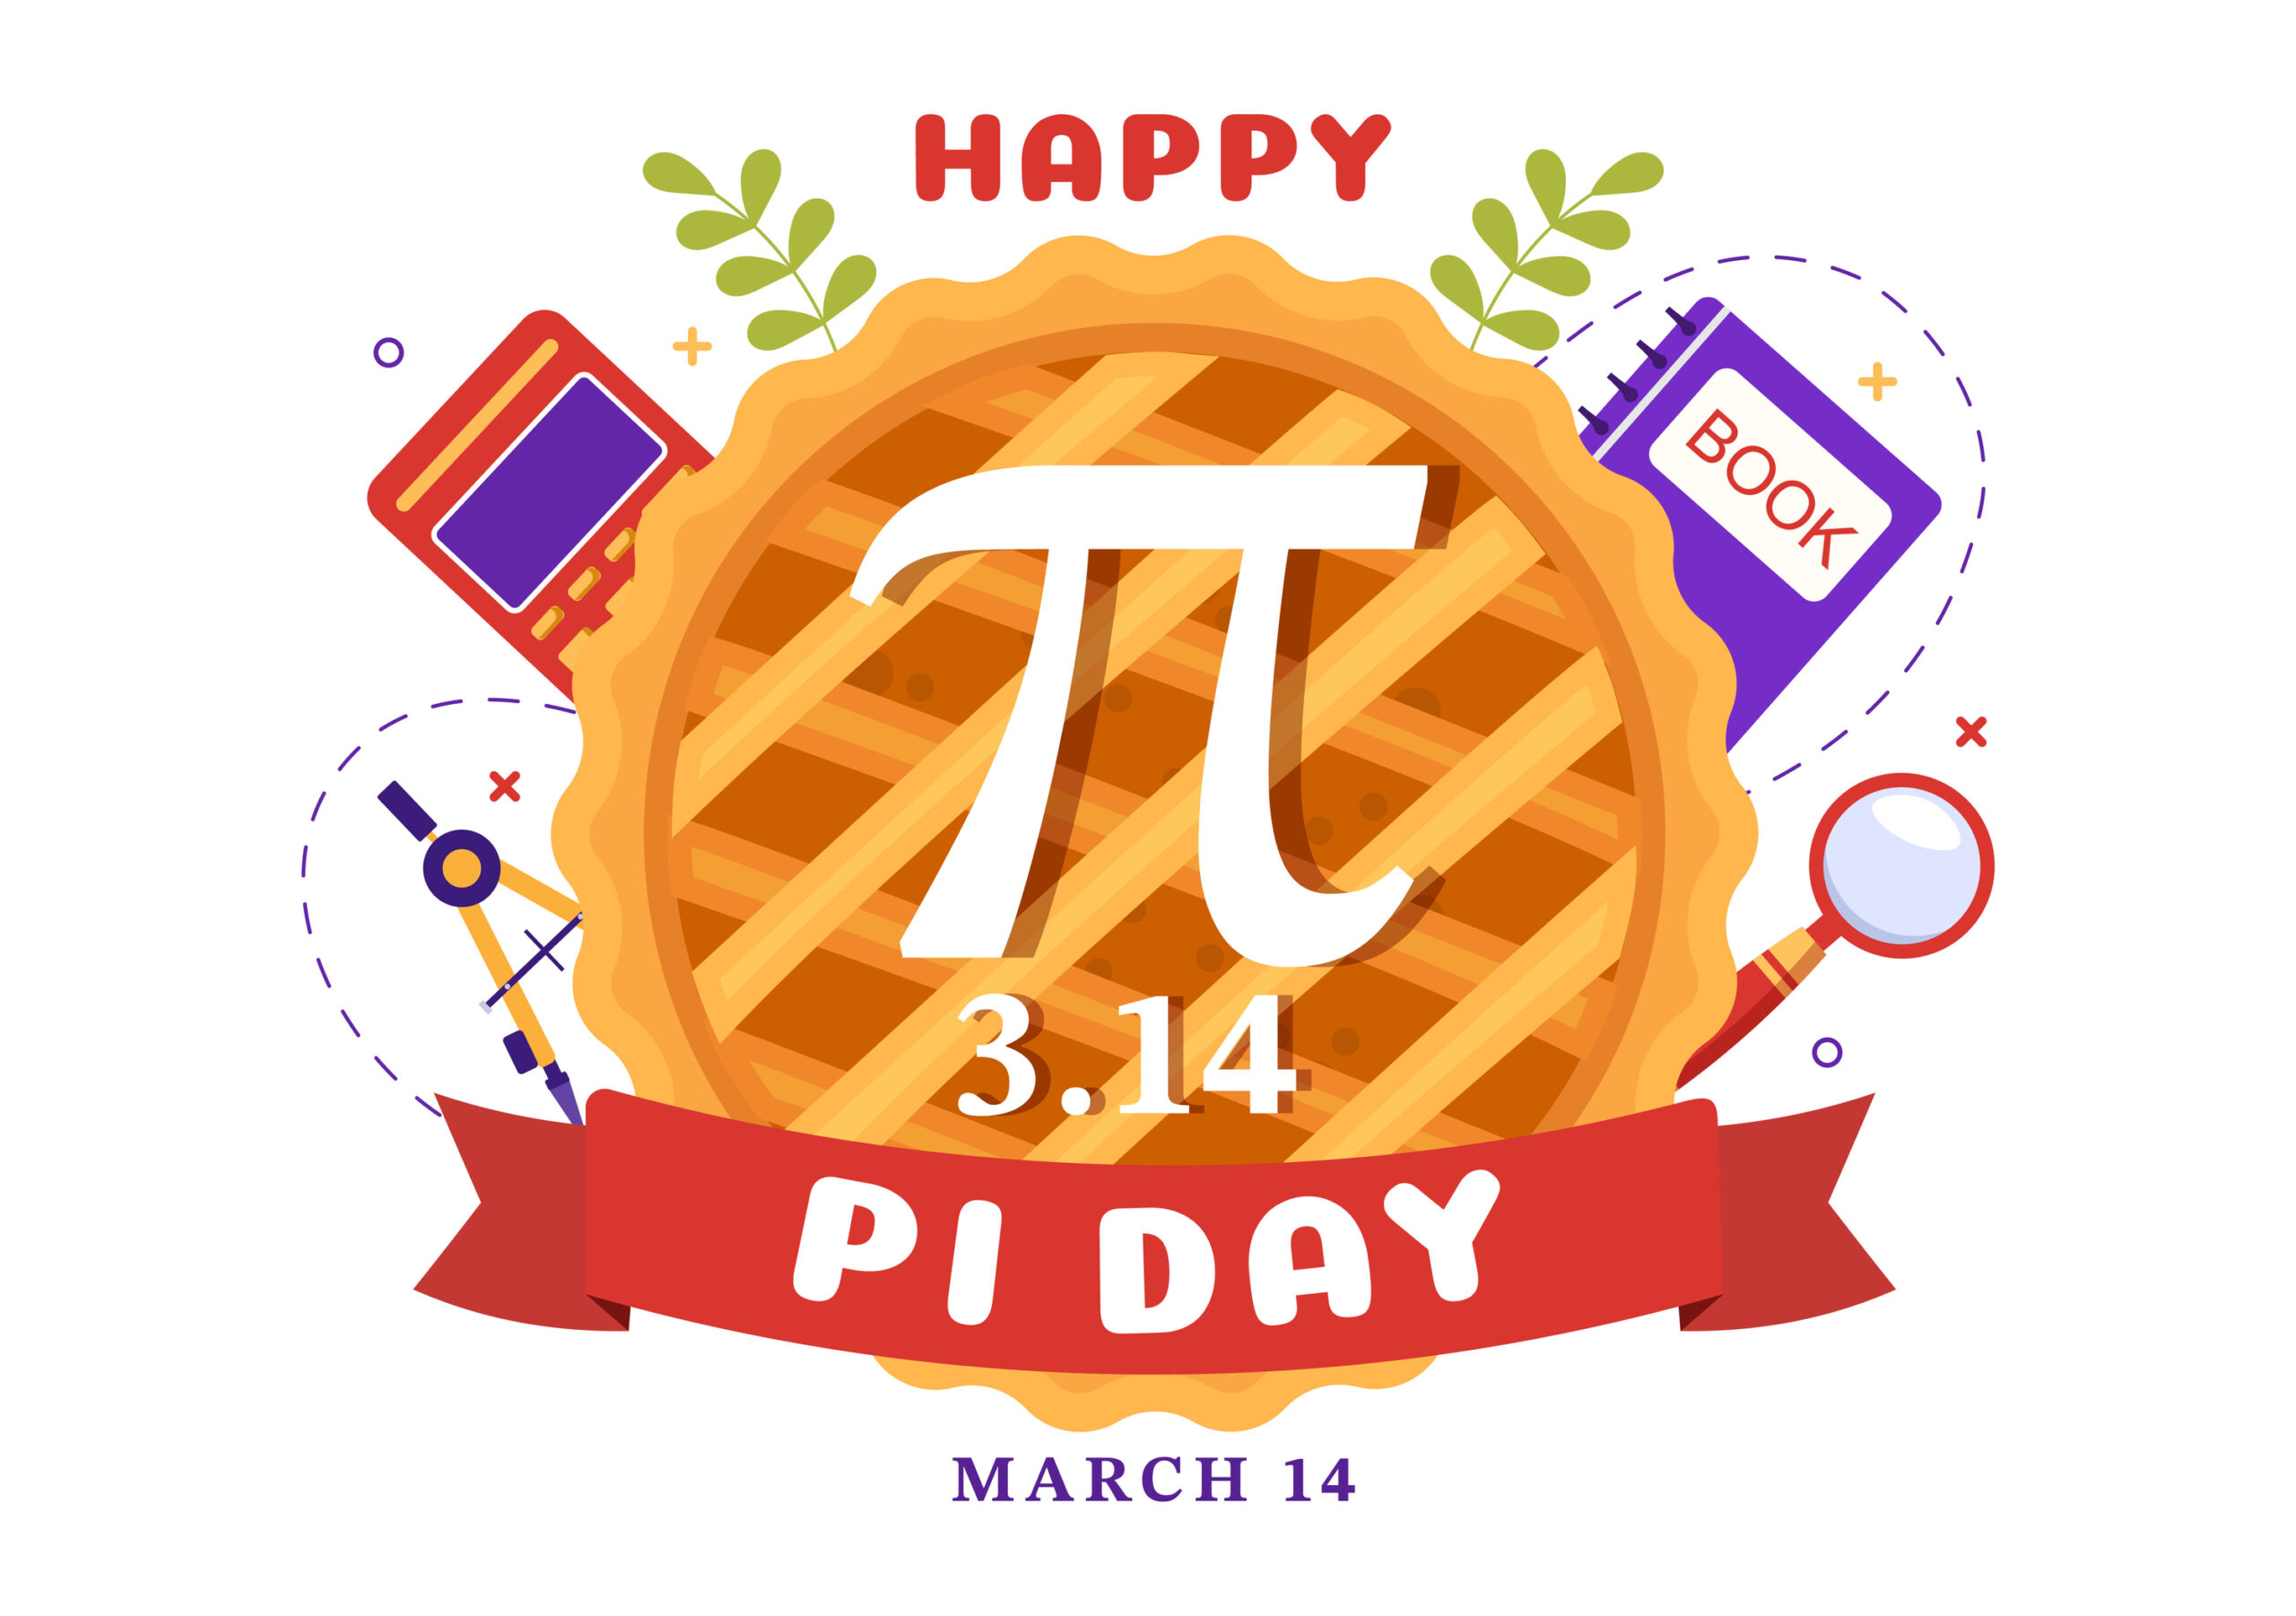 a vector graphic with a centralized pie with a white pi symbol on it. There are ferns out of the top on each side was well as the word happy in red. there is a ribbon with the word pi day written in white. There is a protractor, a book, and a magnifying glass appearing from behind the pie.